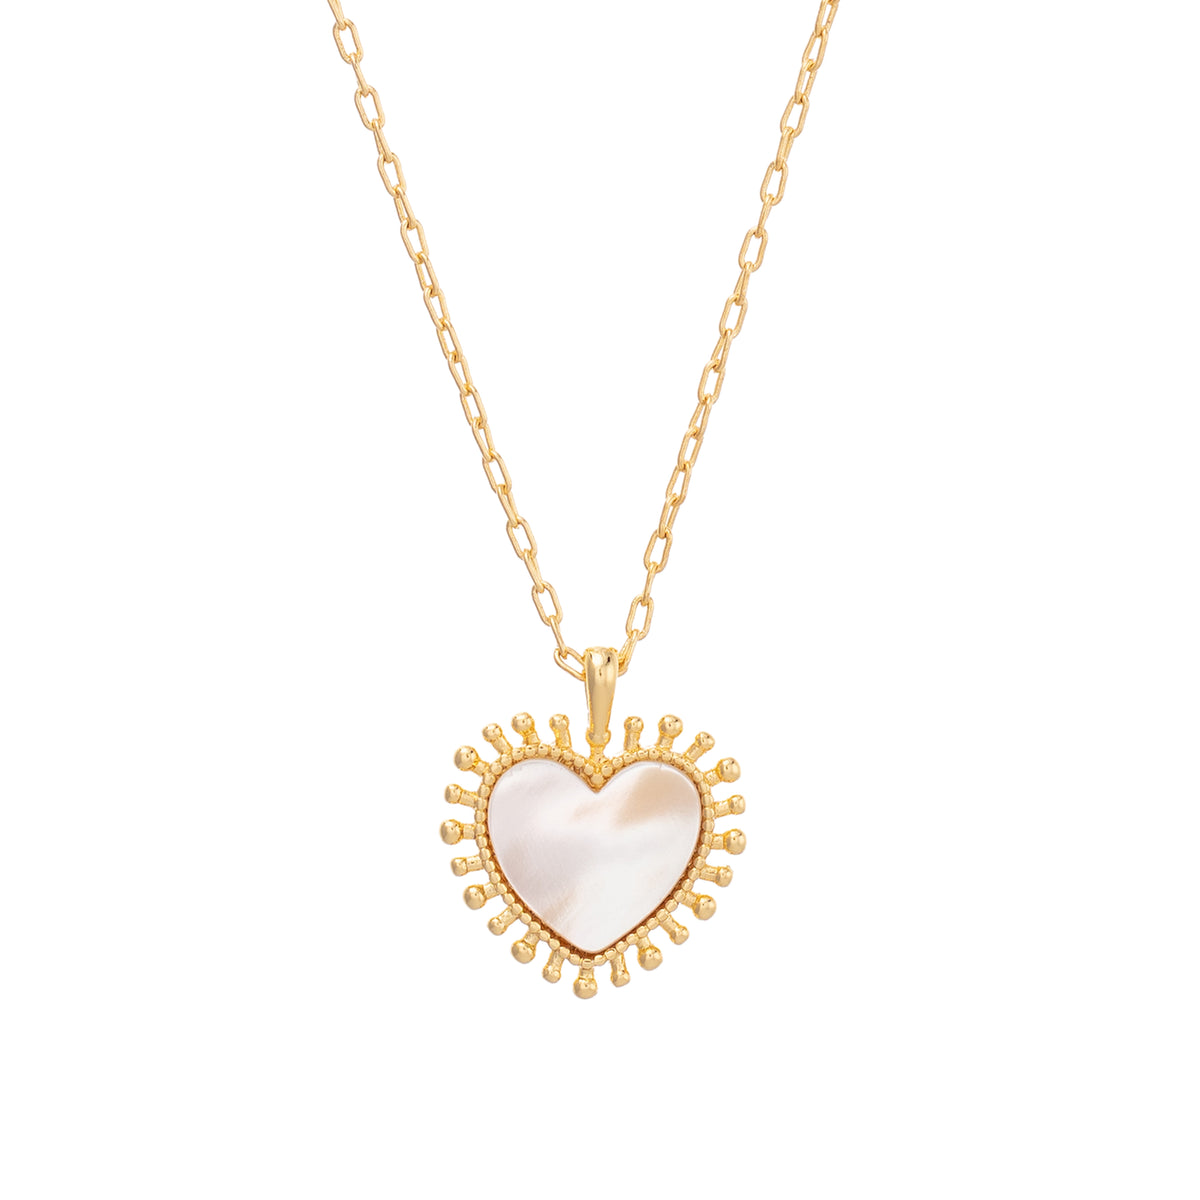 pretty heart shaped pendant necklace with mother of pearl stone detail